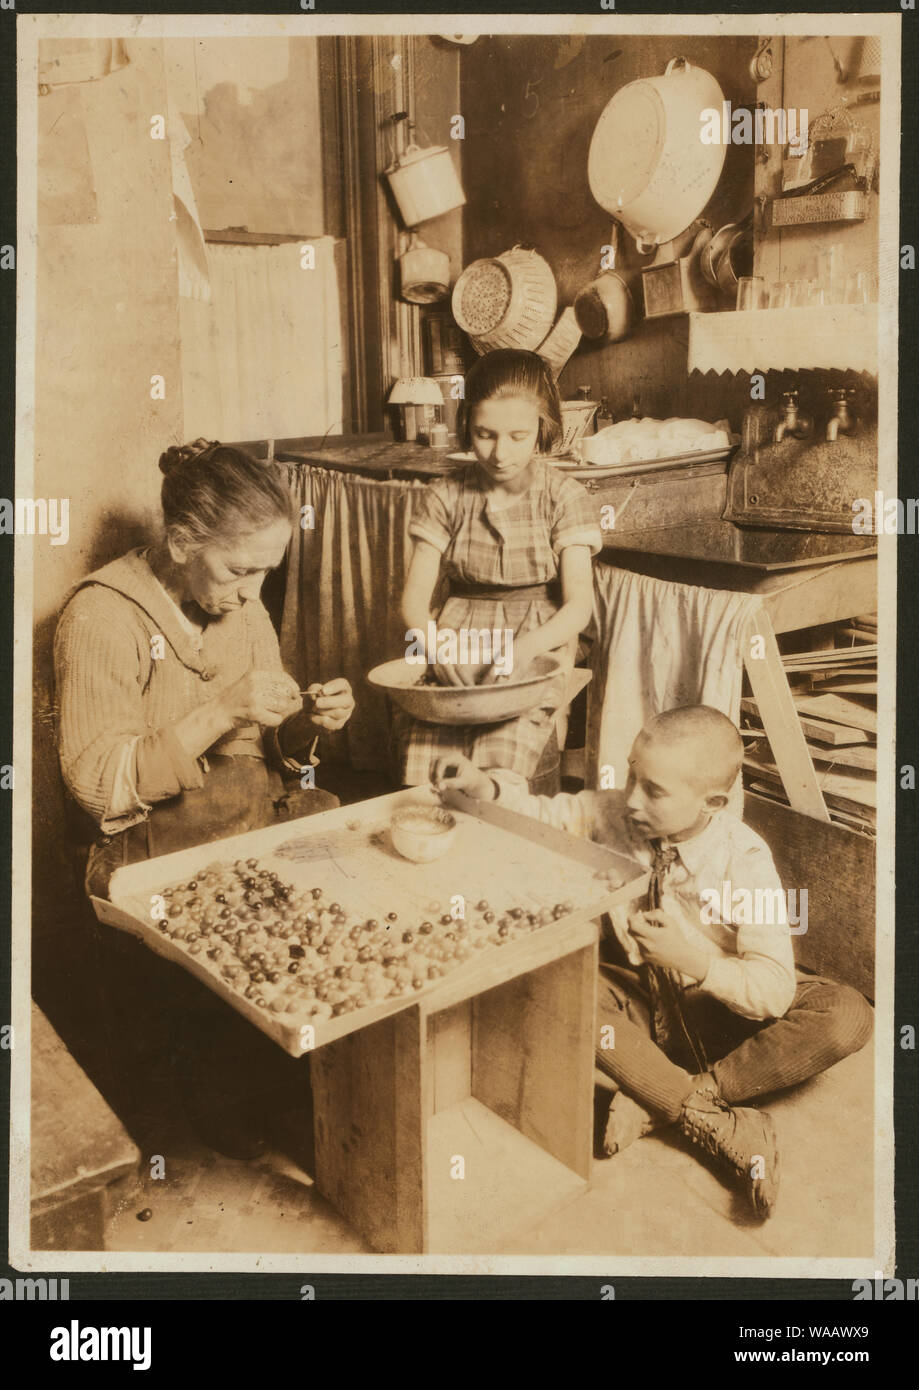 Coccaro, Angelina, 226 Thompson St., N.Y.C. Making Glass Flower Bulbs, earn about 75 cents to a $1.50 a day. Elizabeth age 10 yrs., and Frank age 8 yrs., very small and anemic. Taken by Hiram Myers, Photo. Dept. N.Y.C. Abstract: Photographs from the records of the National Child Labor Committee (U.S.) Stock Photo